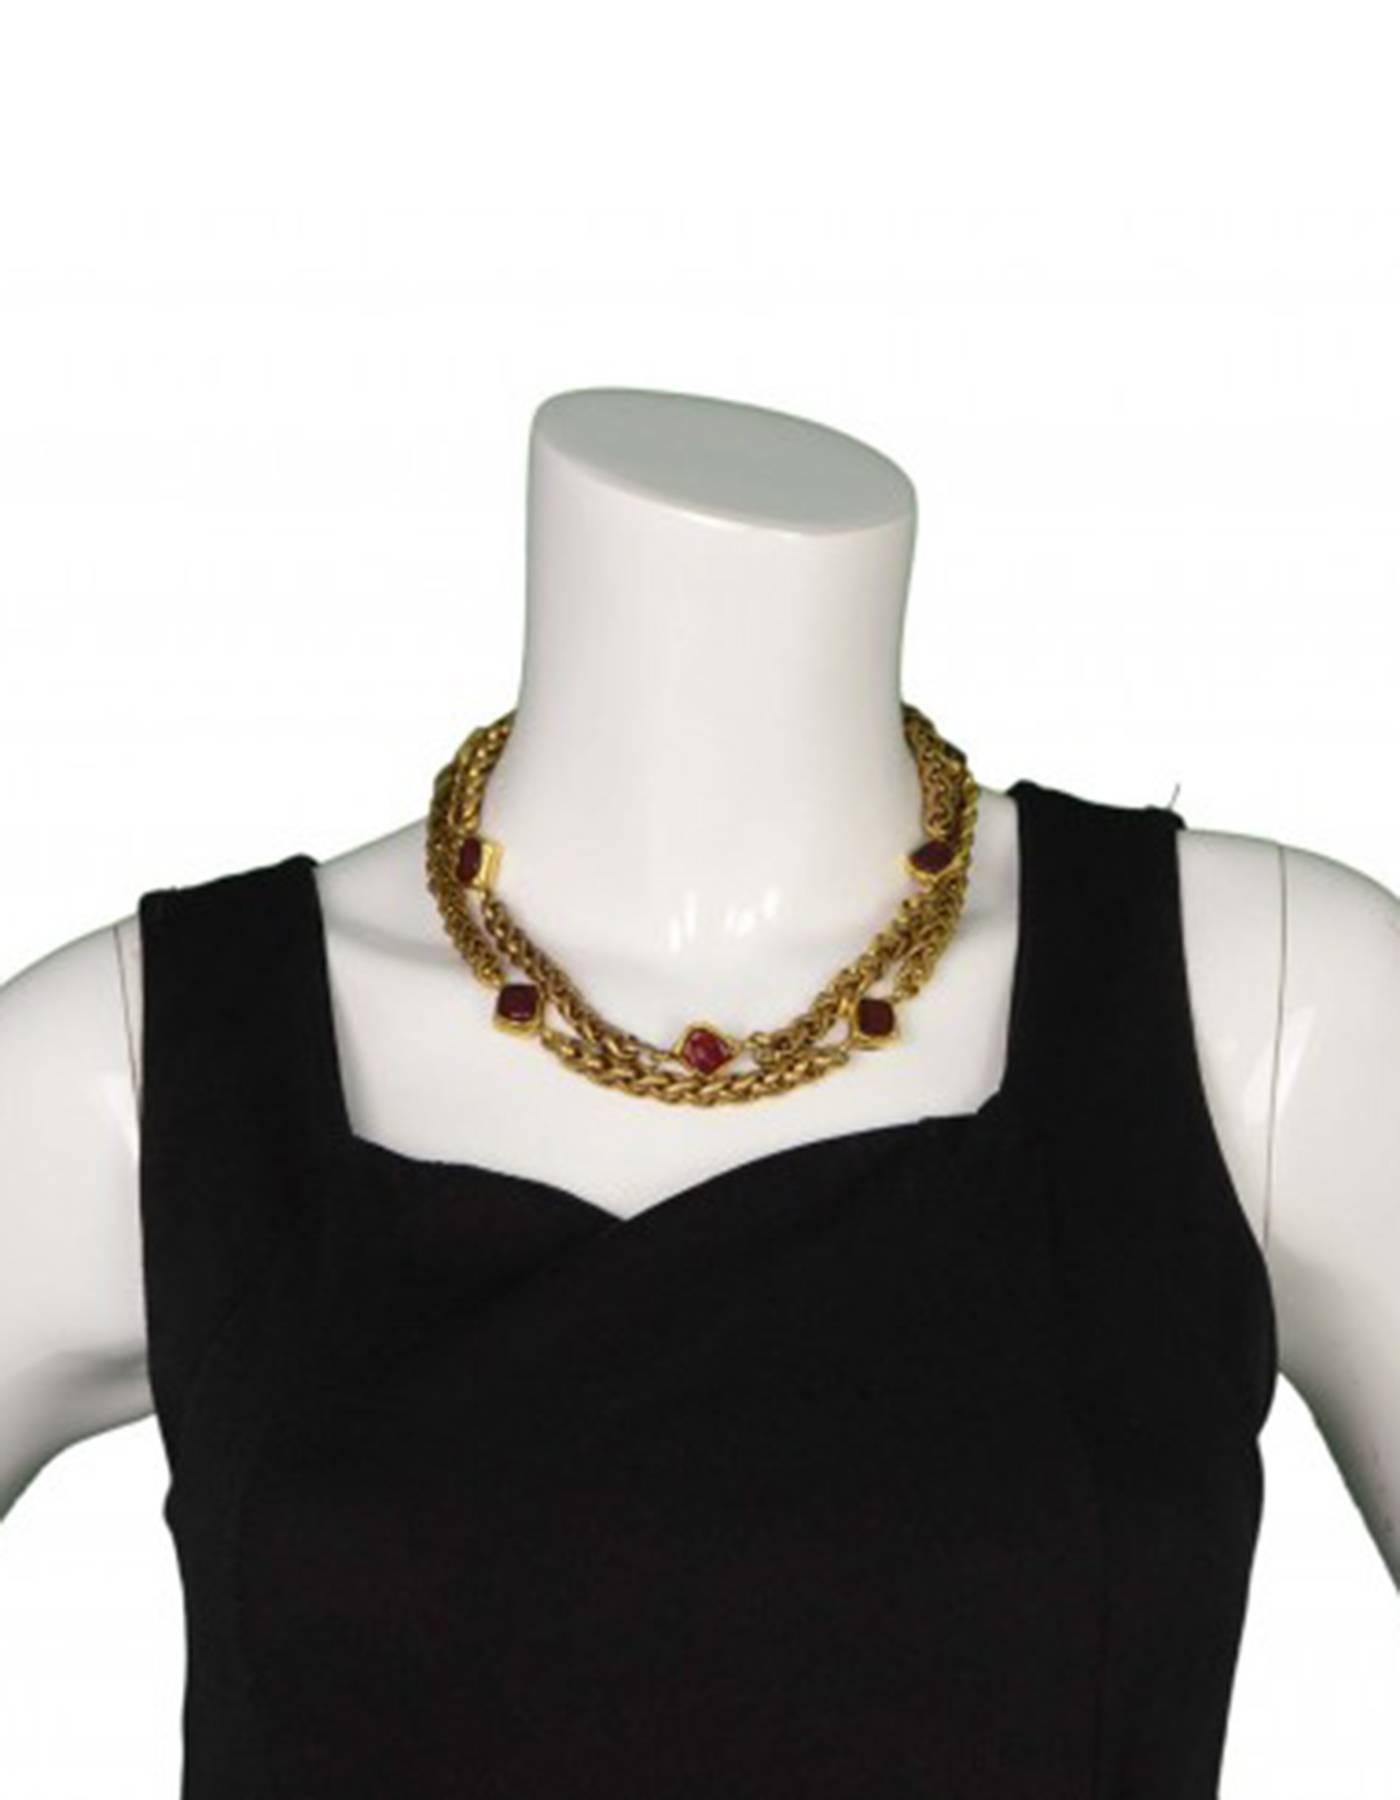 CHANEL Vintage '70s Double Chain Link & Red Gripoix Choker Necklace 2